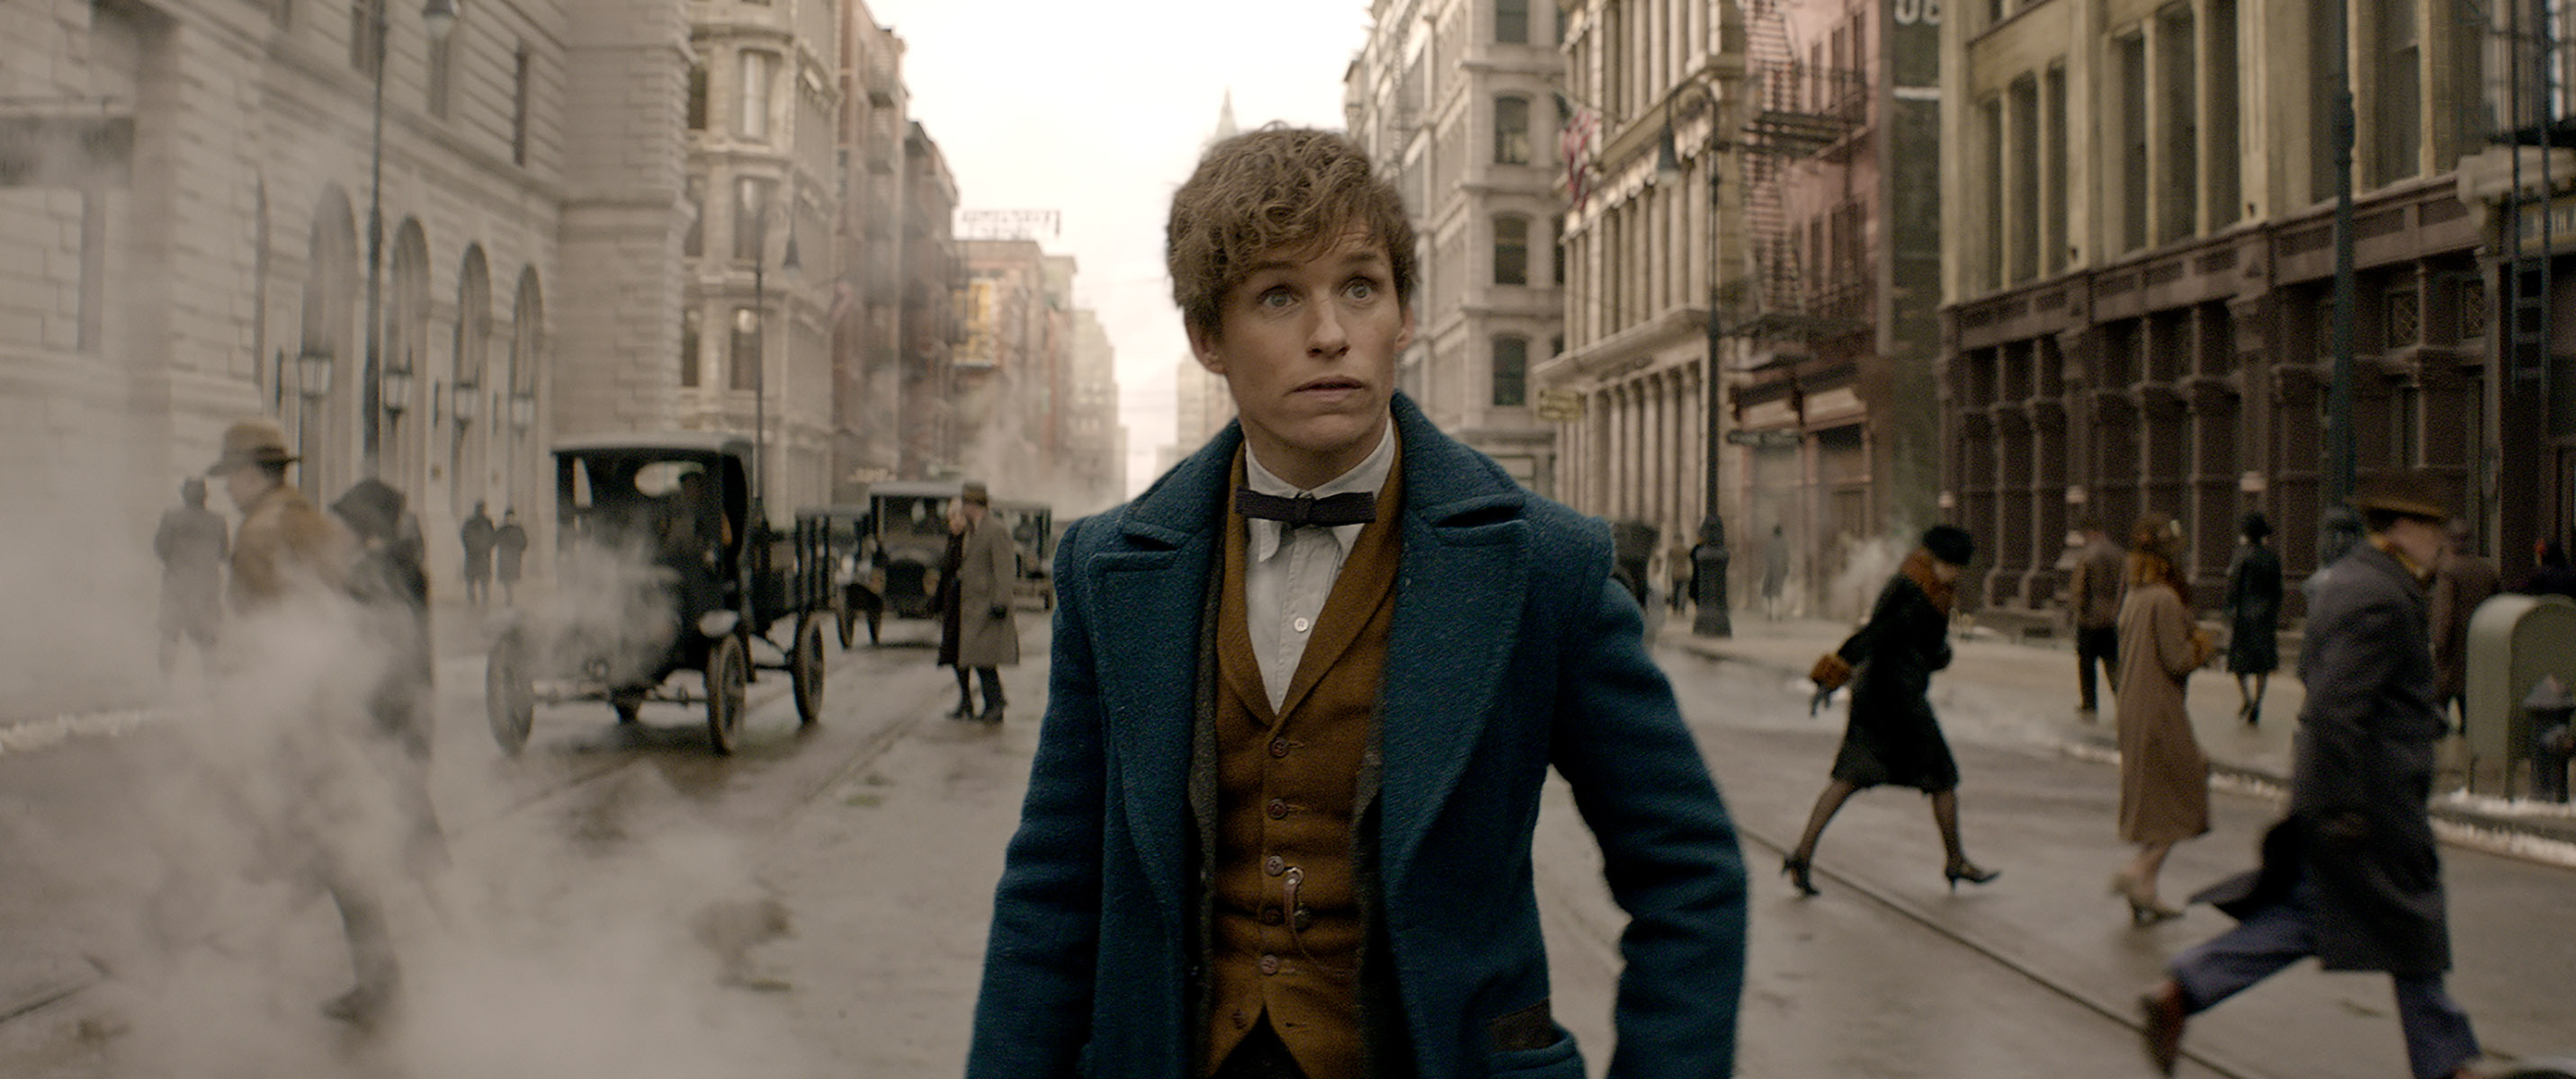 Online Watch Film 2016 Fantastic Beasts And Where To Find Them